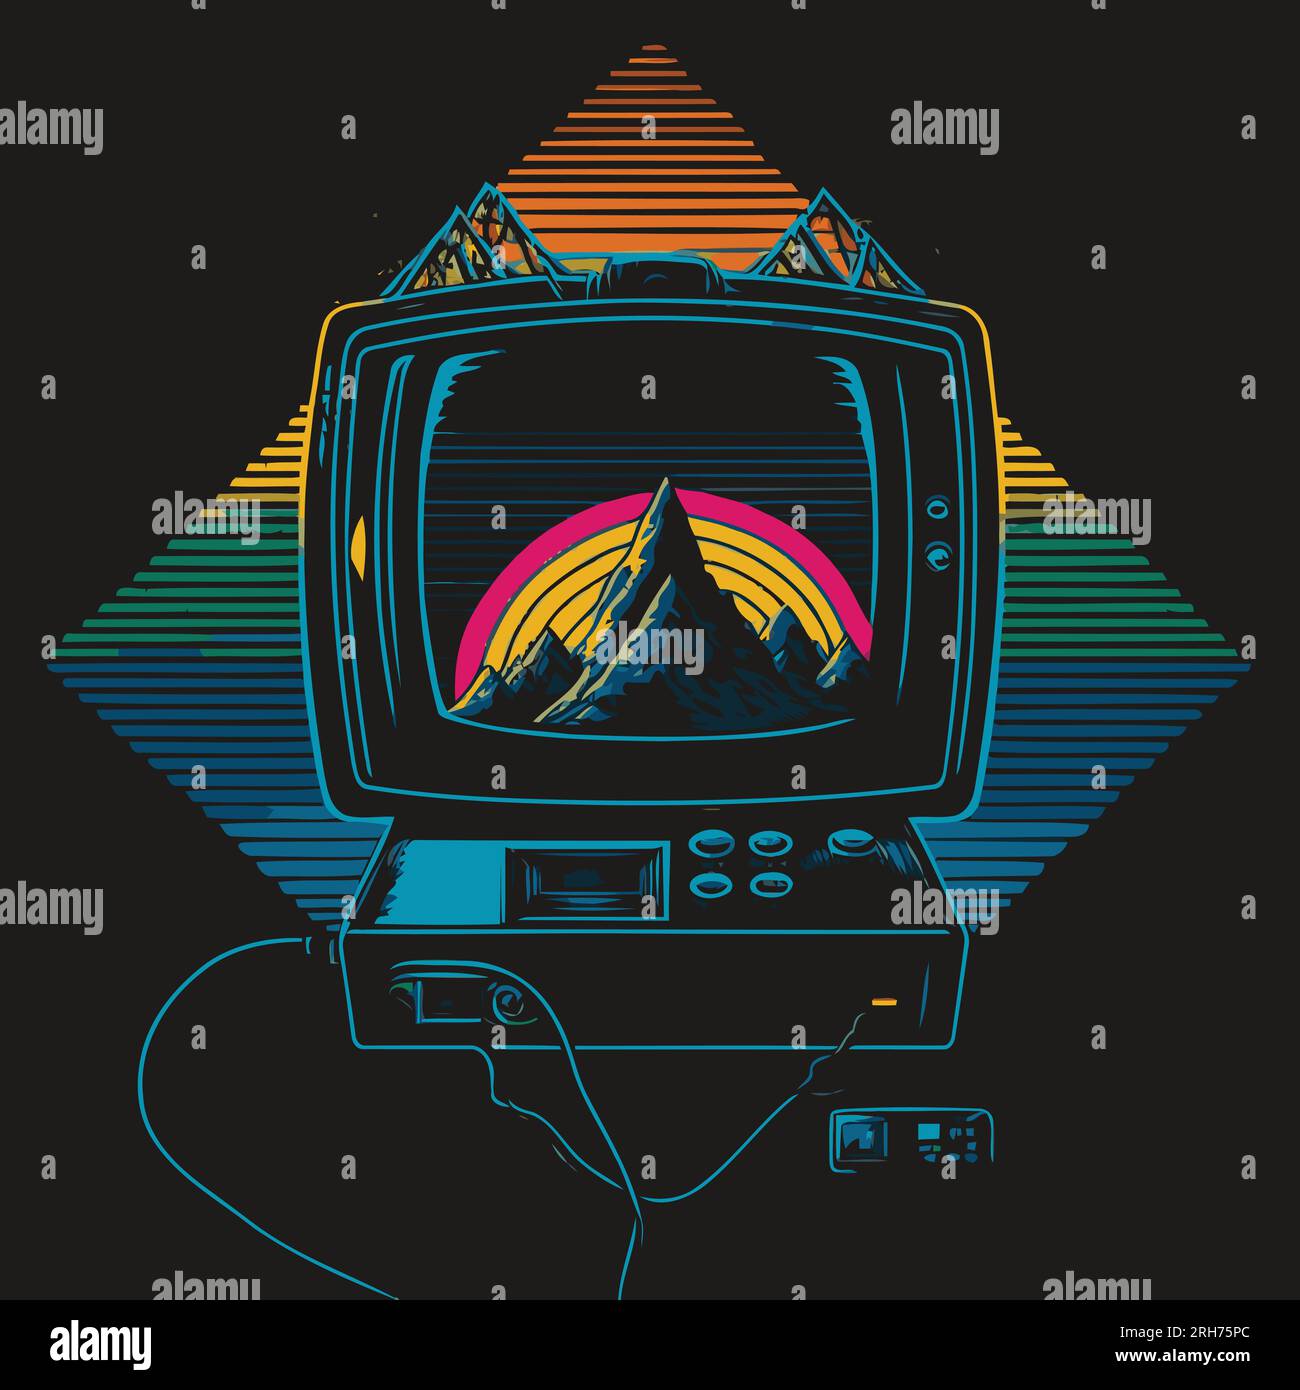 Isolated Line Drawing of a Vintage CRT Television and VCR Showing Mountains & Rainbow. Vector Art. Retro Pixelart, Sci-Fi, Video Game Style. Stock Vector